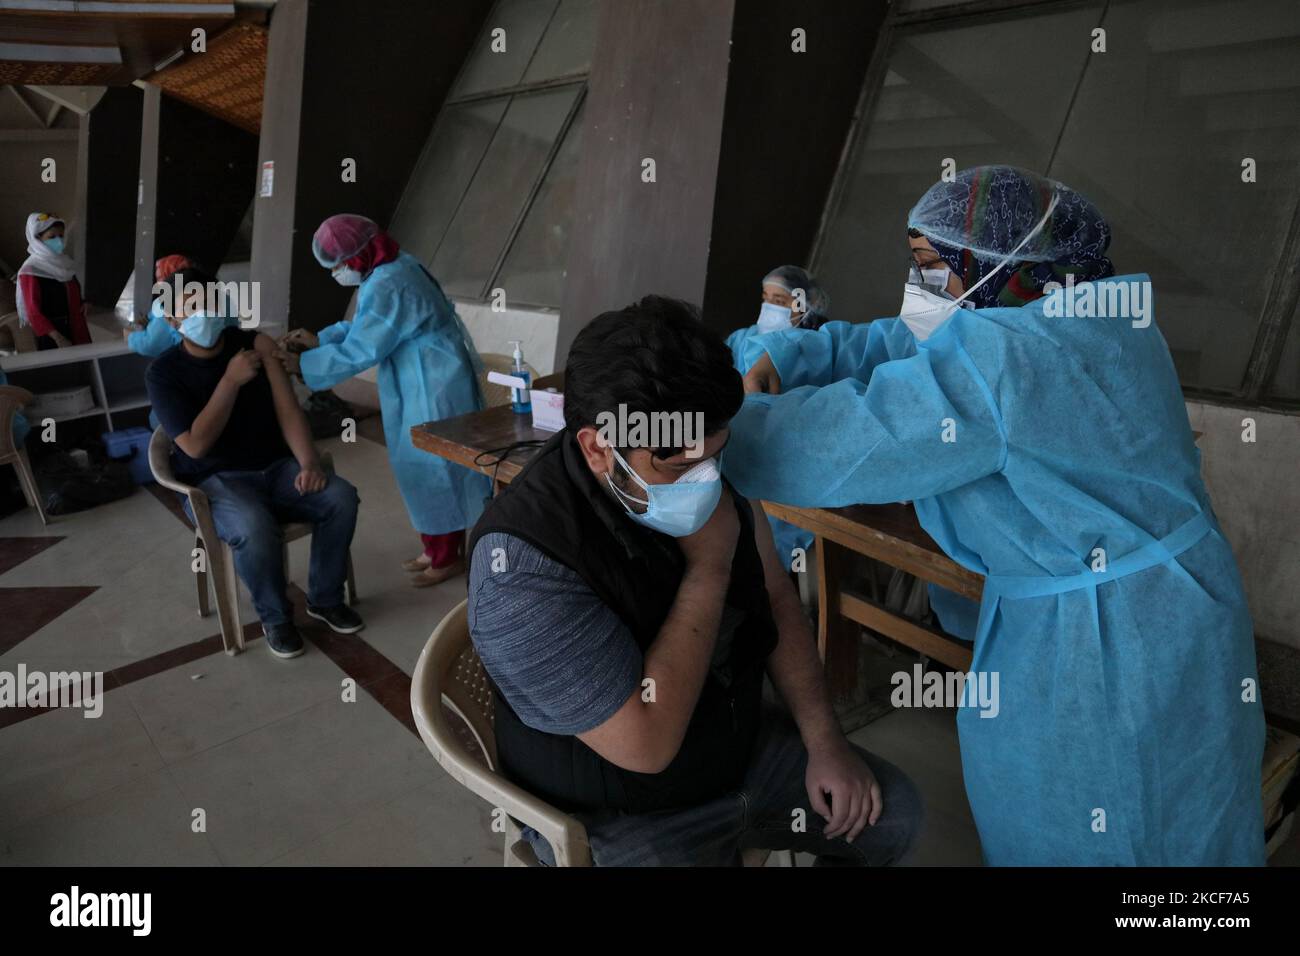 Health workers inject a dose of AstraZeneca Covid-19 vaccine at a makeshift health center in Srinagar, Indian Administered Kashmir on 25 May 2021. India recorded below 2,00,000 covid-19 cases lowest in last 40 days. 3260 deaths were reported across India in last 24 hours. (Photo by Muzamil Mattoo/NurPhoto) Stock Photo